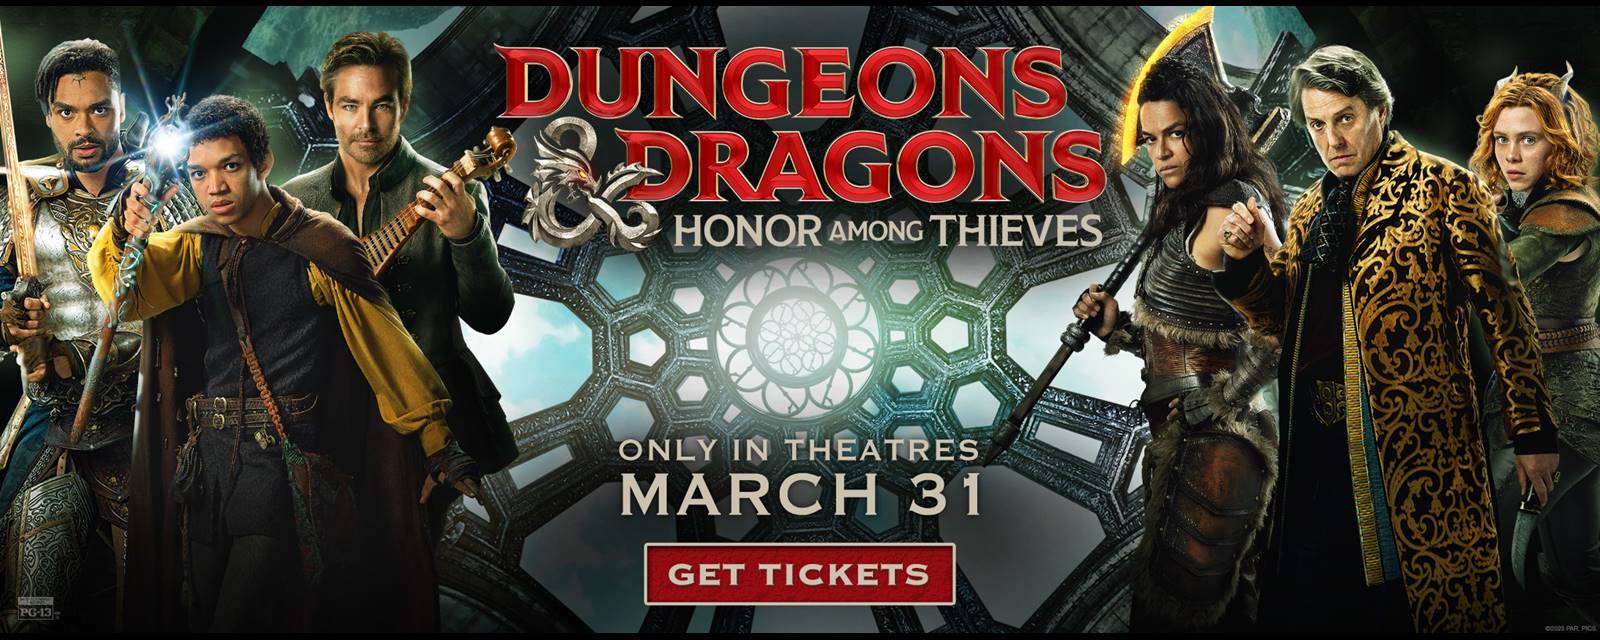 DUNGEONS & DRAGONS: HONOR AMONG THIEVES